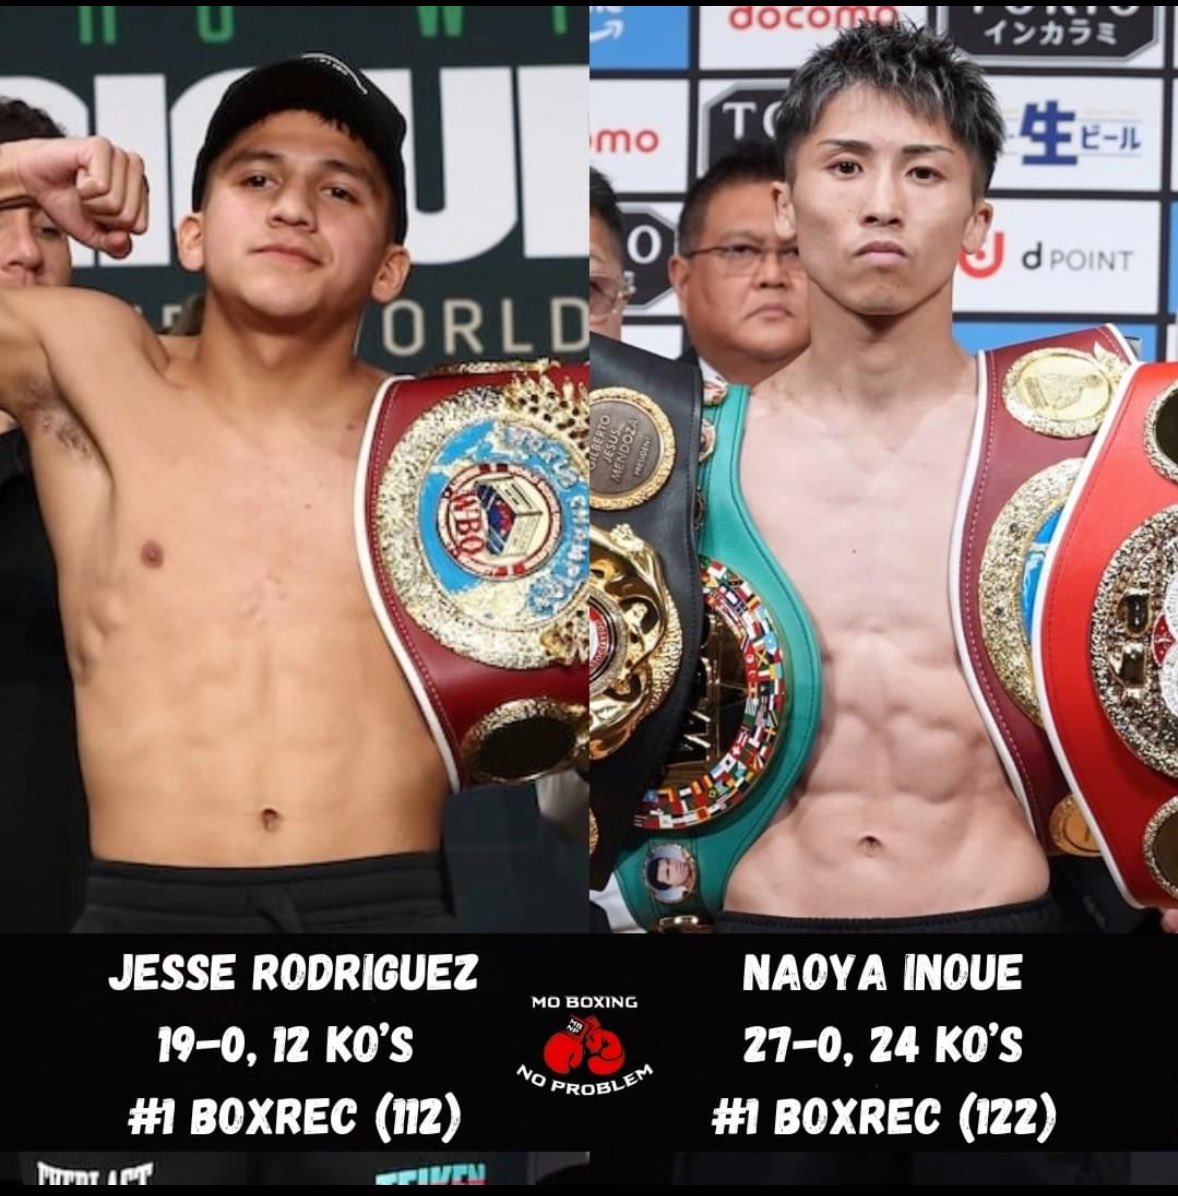 It is being rumored that Eddie Hearn and His Excellency Turki Alalshikh are in negotiations to stage a megafight between Jesse 'Bam' Rodriguez and Naoya Inoue at Wembley Stadium in September.

Bam would need to get past Juan Francisco Estrada on June 29th first and move up two